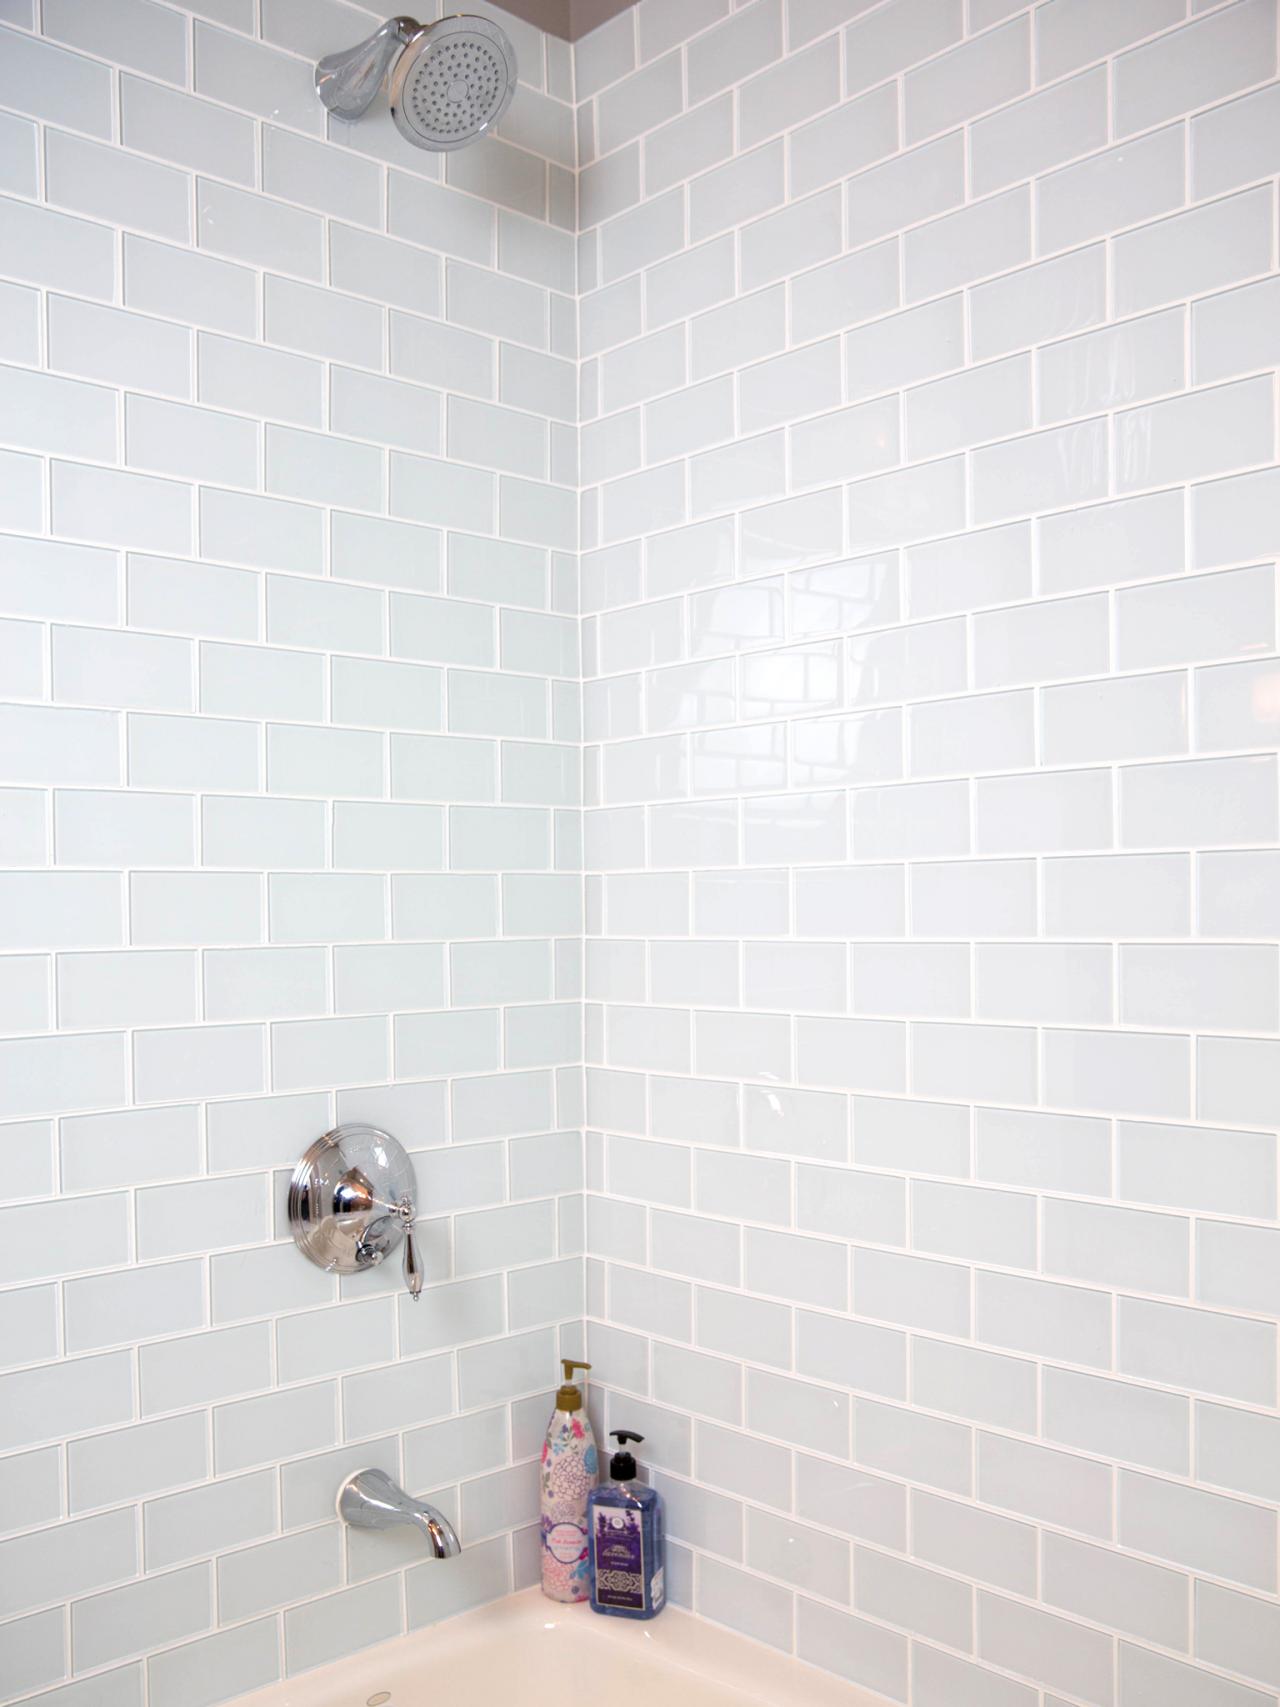 How To Install A Shower Tile Wall, Can You Just Retile A Bathroom